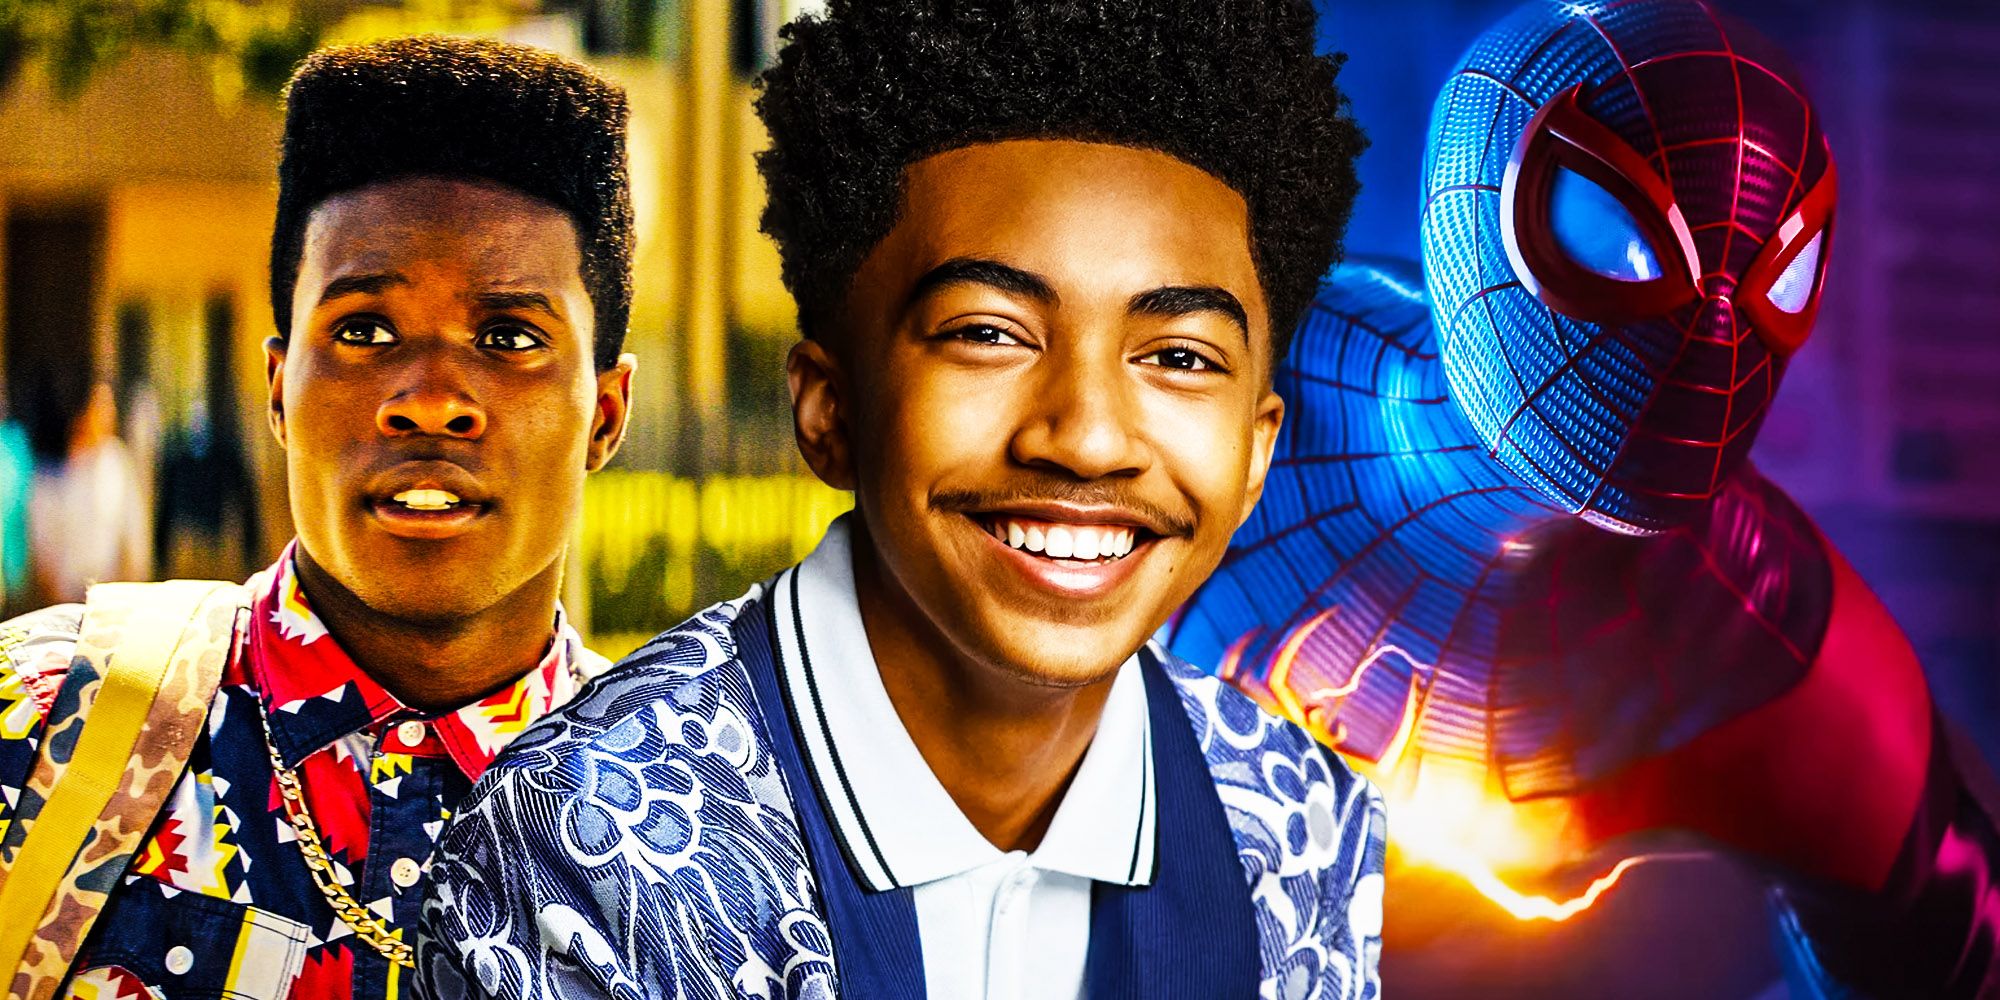 Miles Morales’ Spider-Man Makes The Jump To Live-Action In The Amazing Spider-Man Spin-Off Fan Trailer